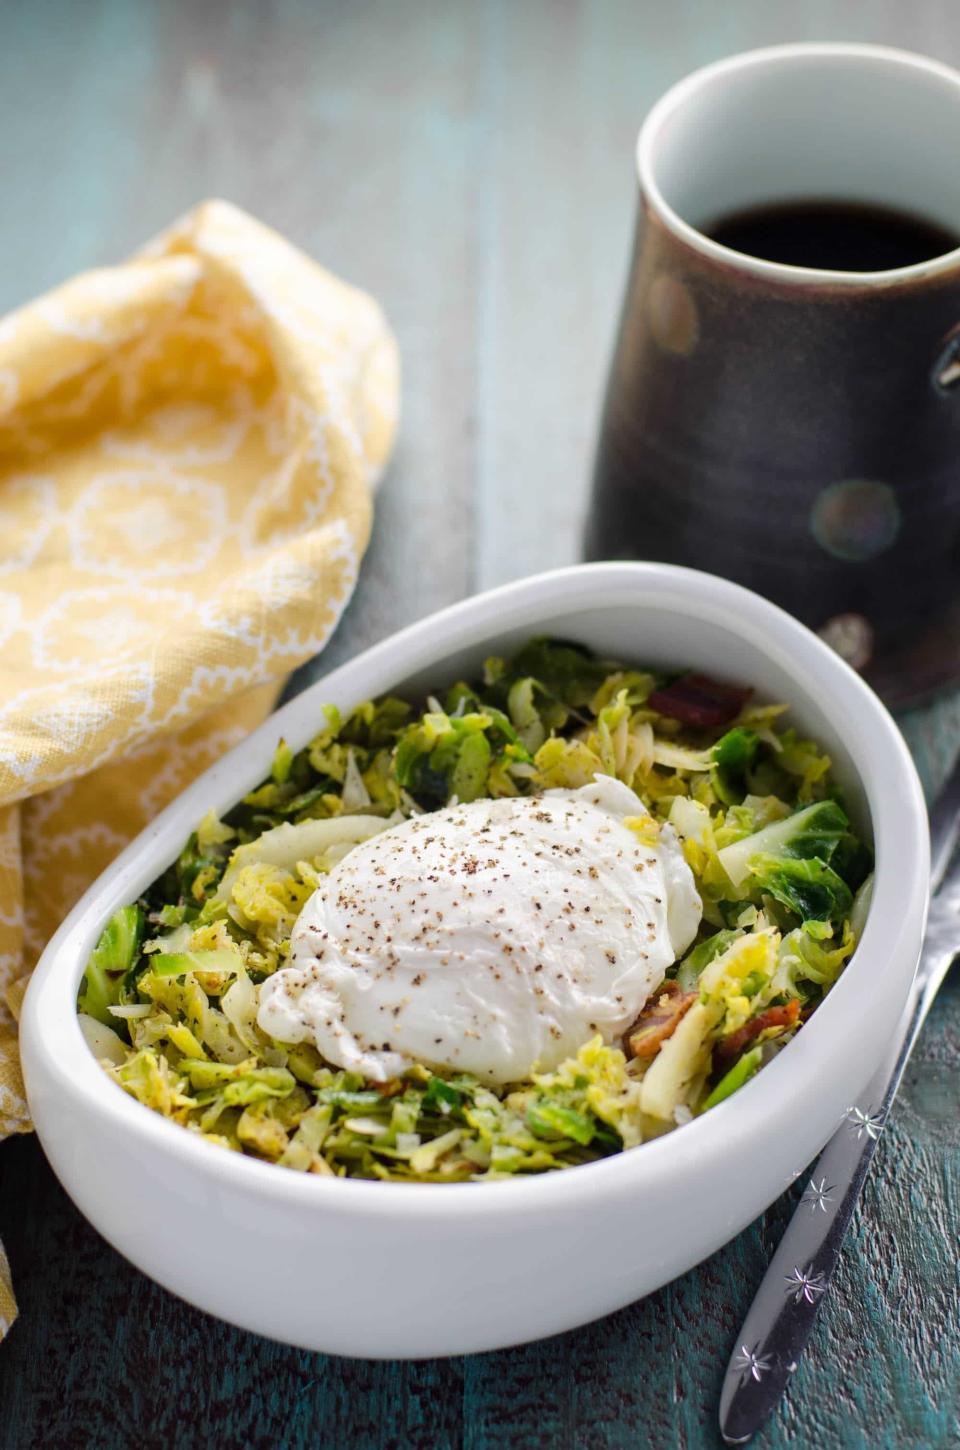 <strong>Get the <a href="https://umamigirl.com/brussels-sprouts-hash-bacon-eggs/" target="_blank">Brussels Sprouts Hash with Bacon and Poached Eggs</a> recipe from Umami Girl</strong>